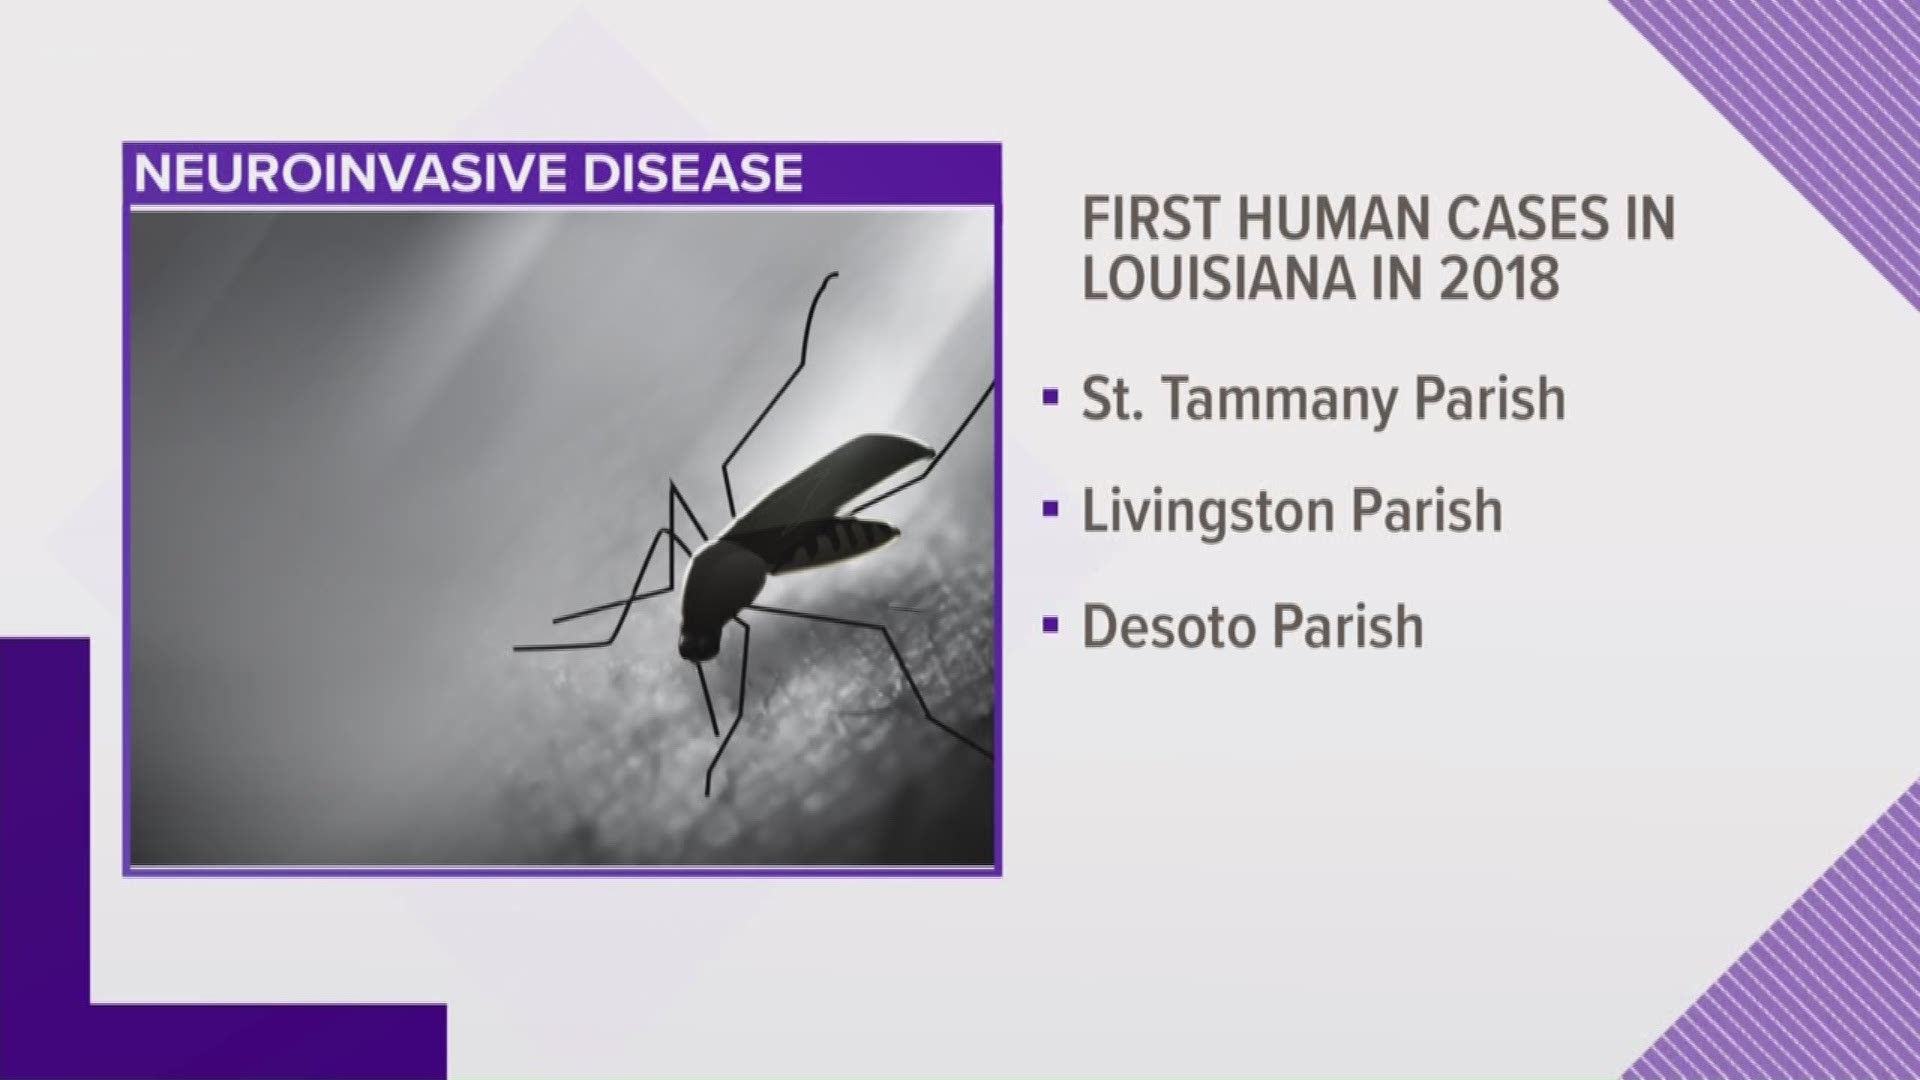 The cases are the first human cases of the virus in Louisiana in 2018.